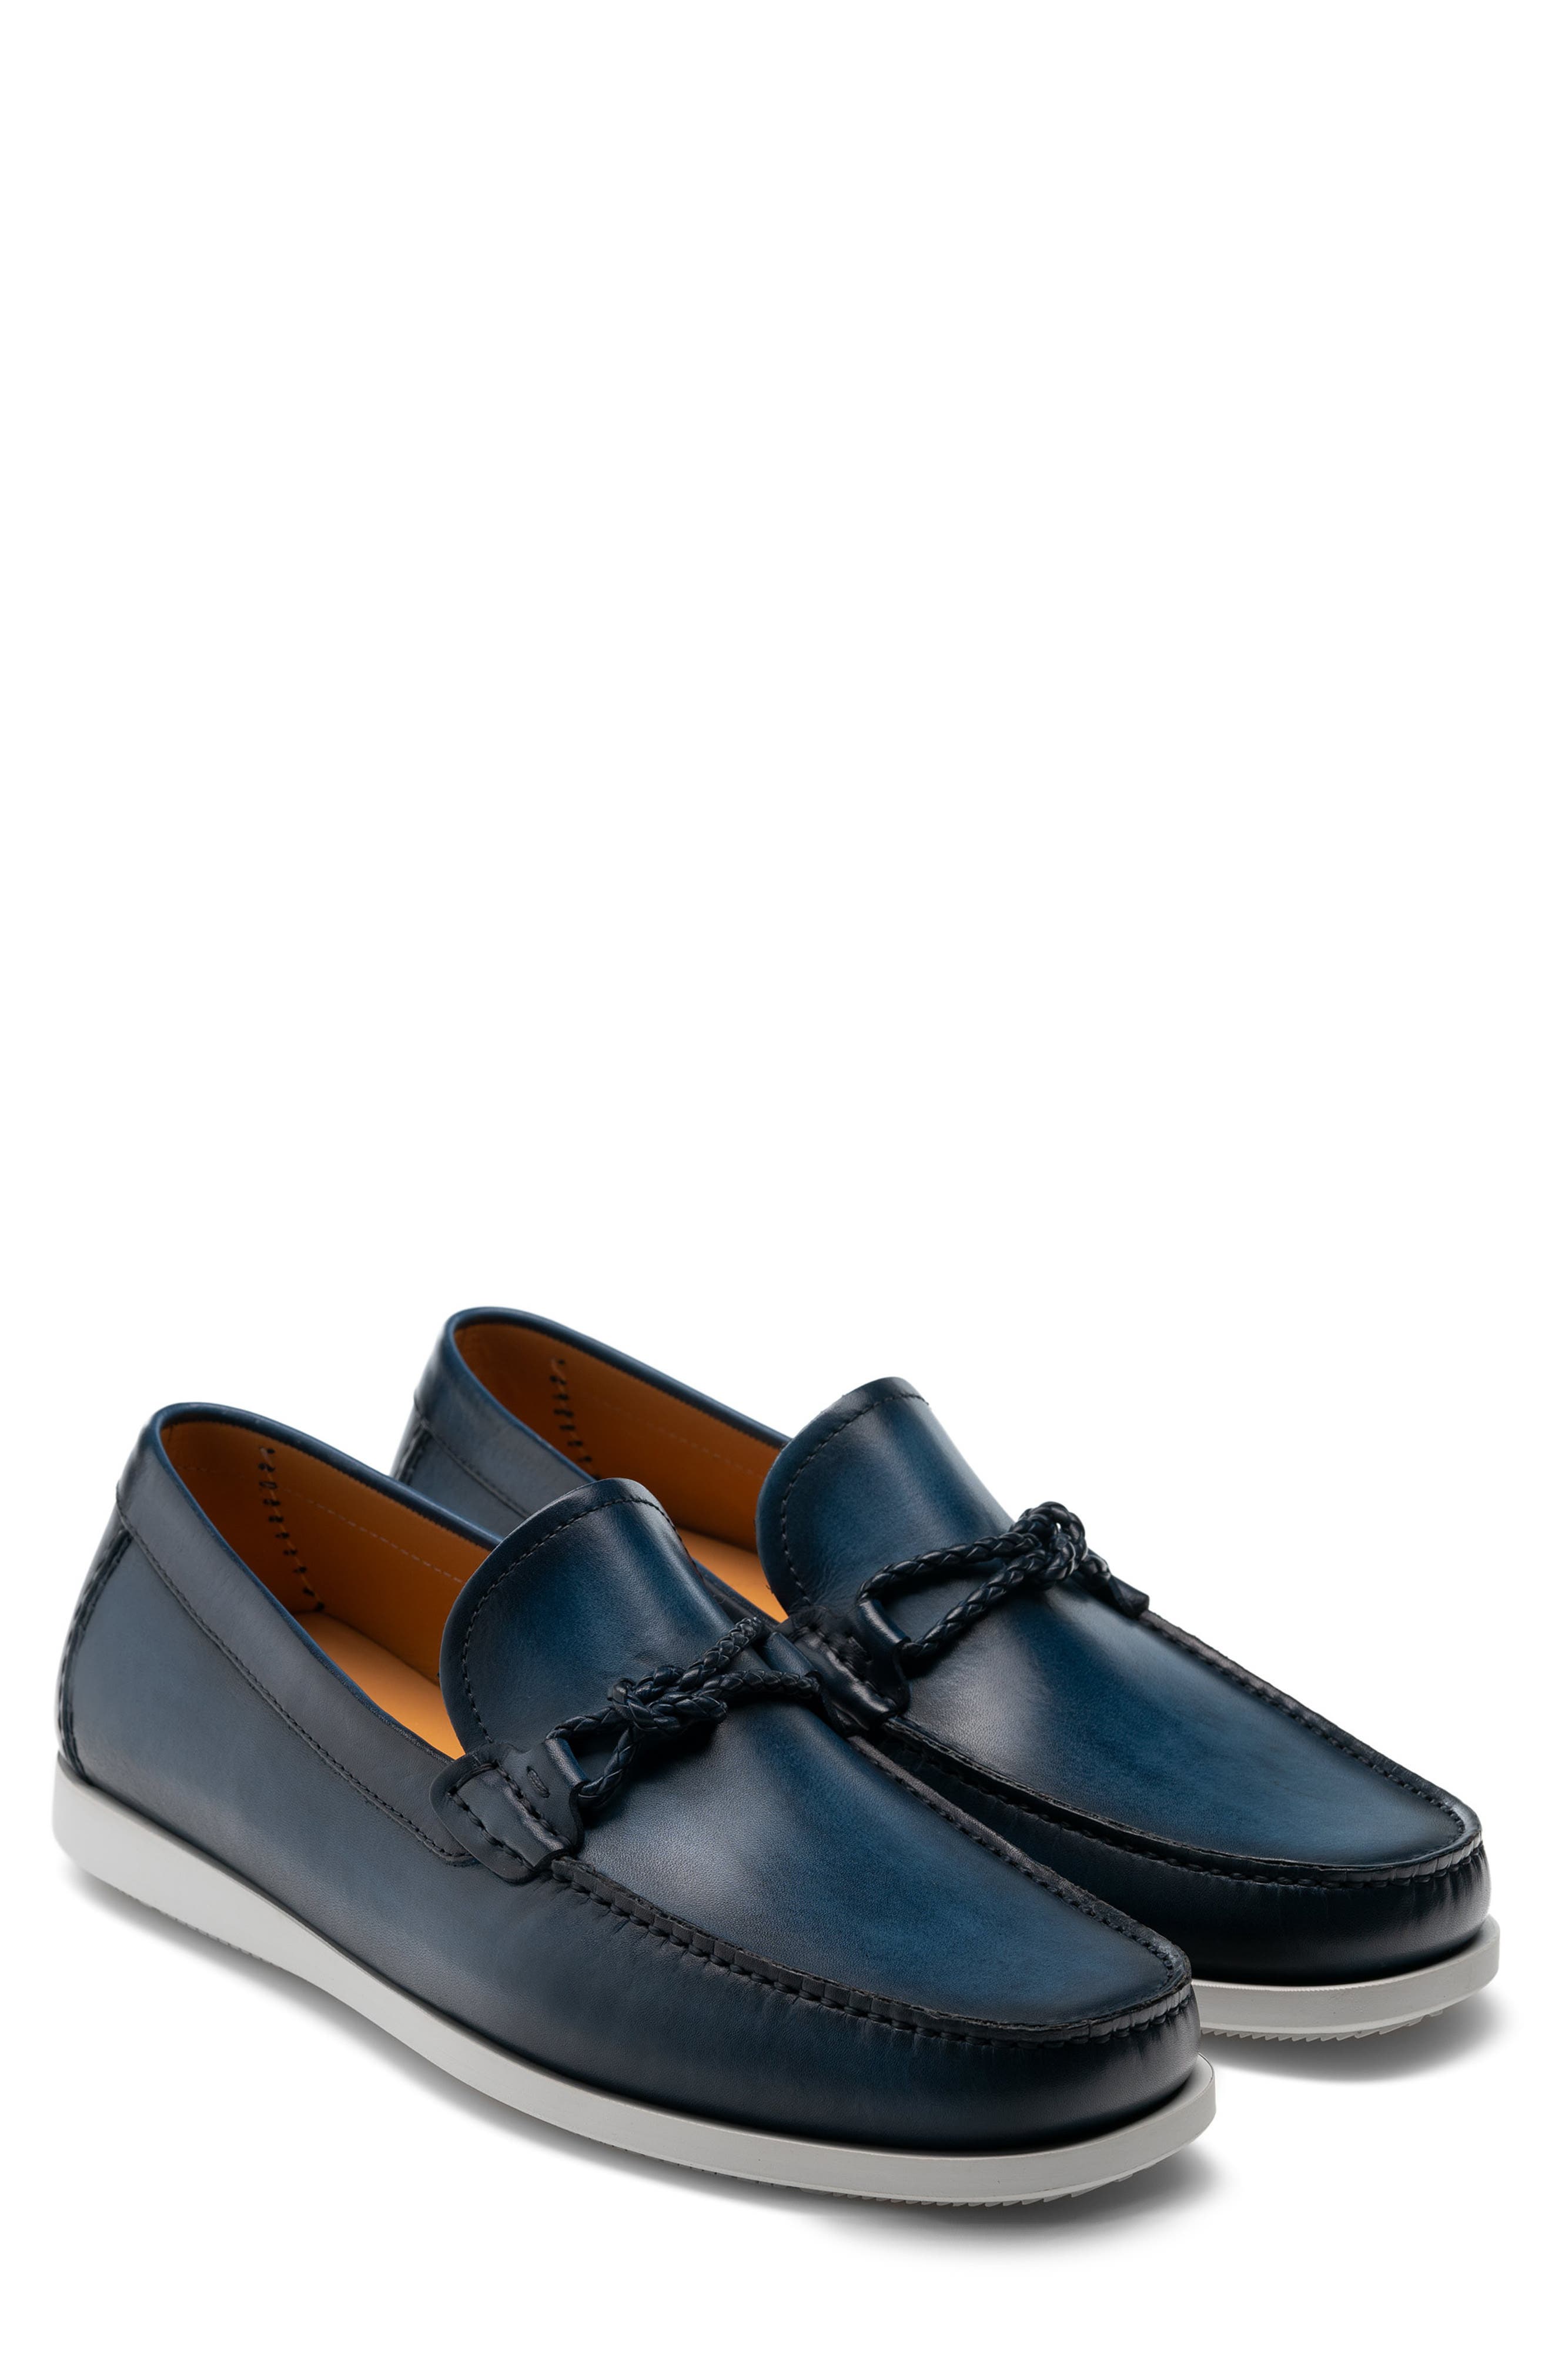 nordstrom men's shoes clearance